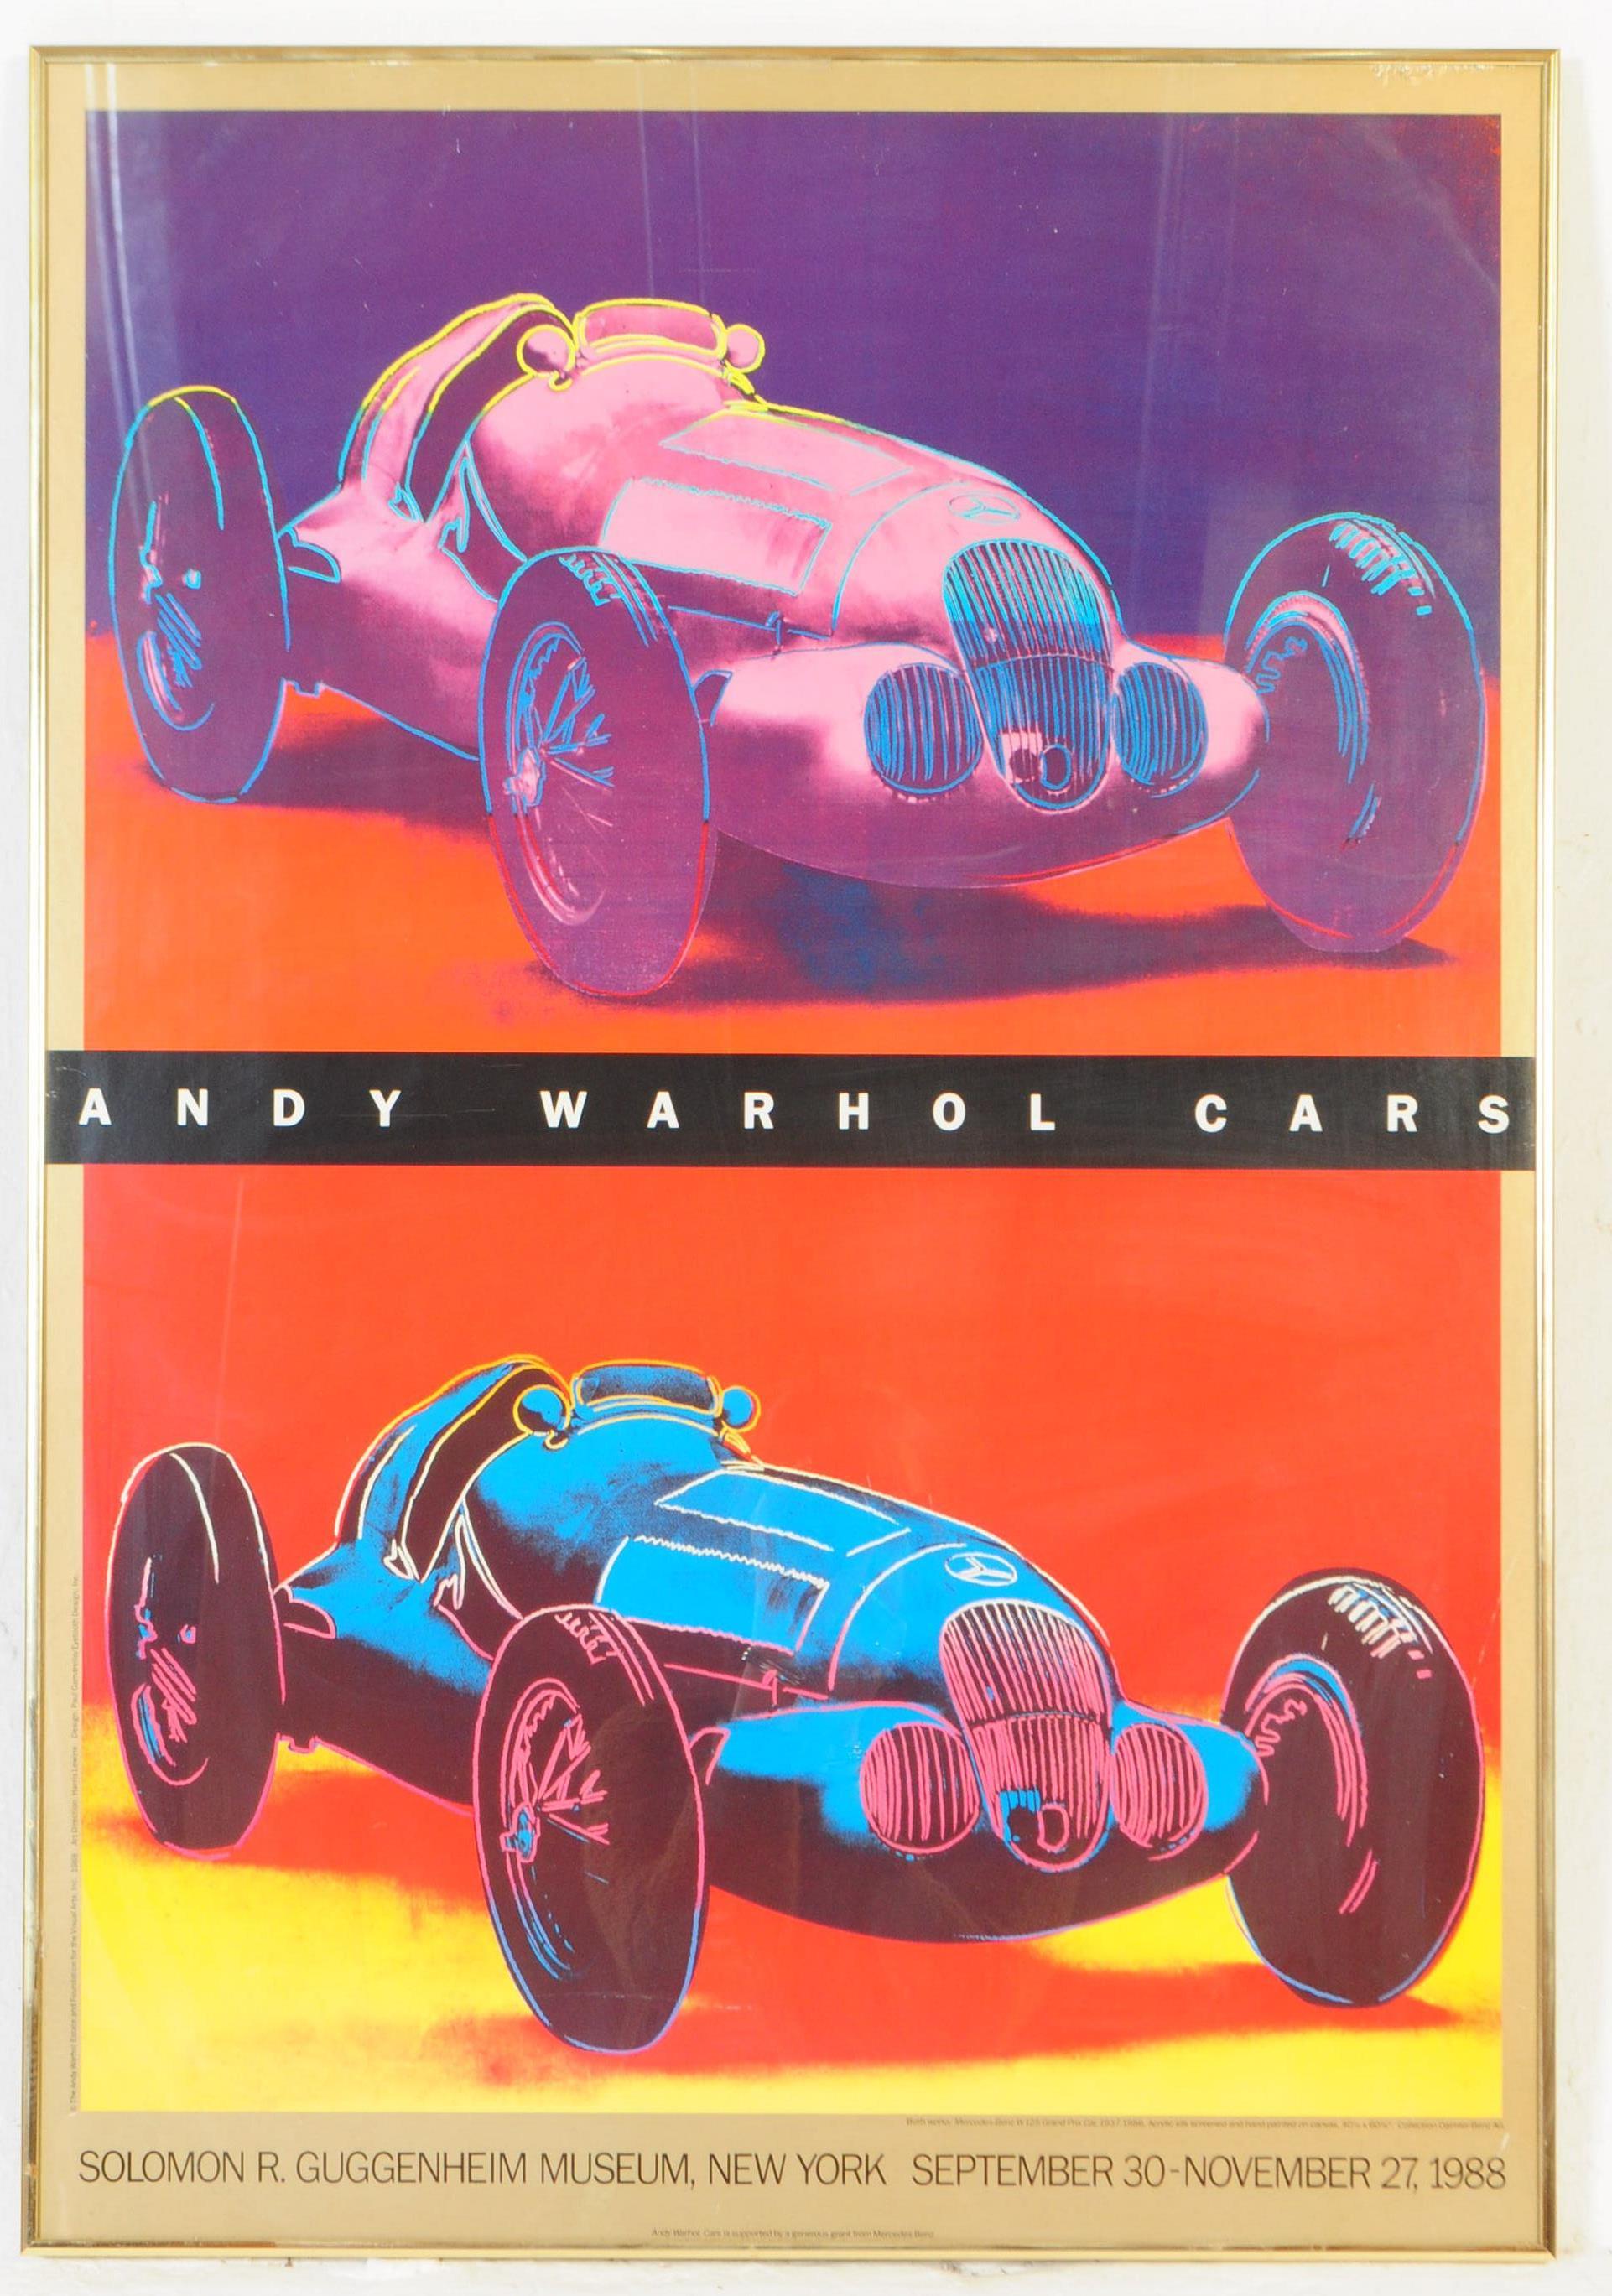 ANDY WARHOL CARS 1988 GUGGENHEIM EXHIBITION POSTER - Image 2 of 6